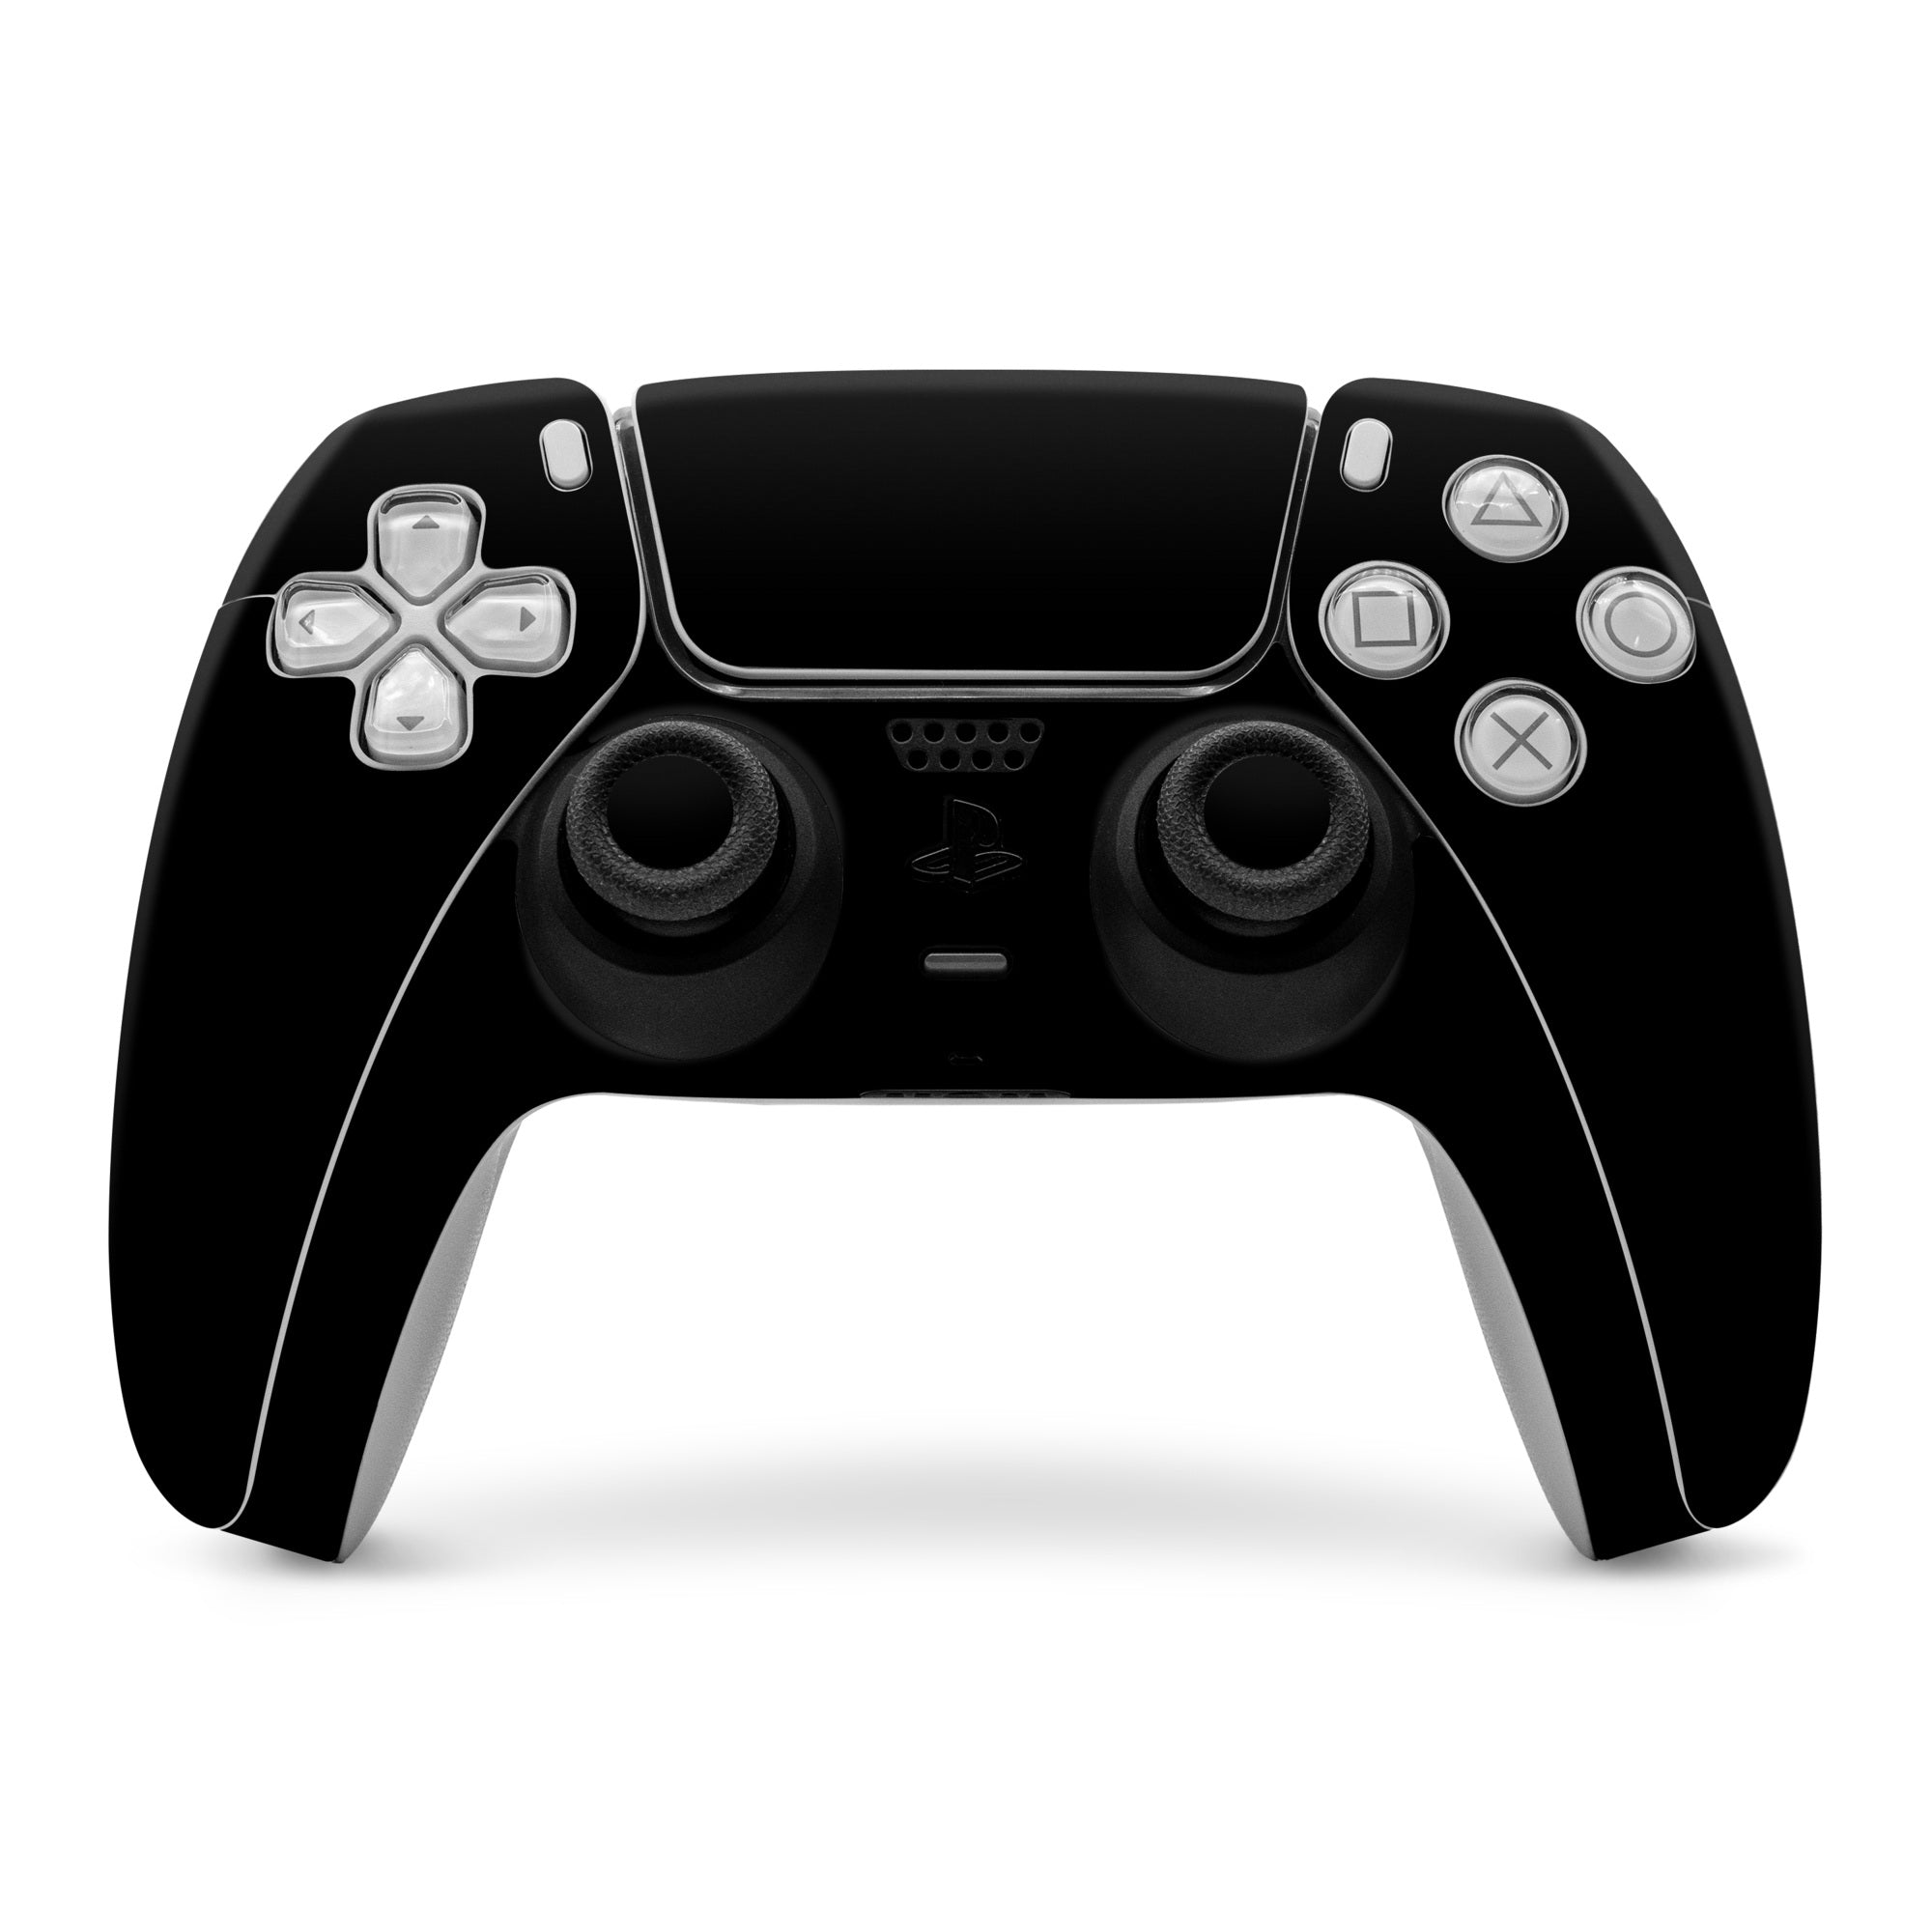 Solid State Black - Sony PS5 Controller Skin